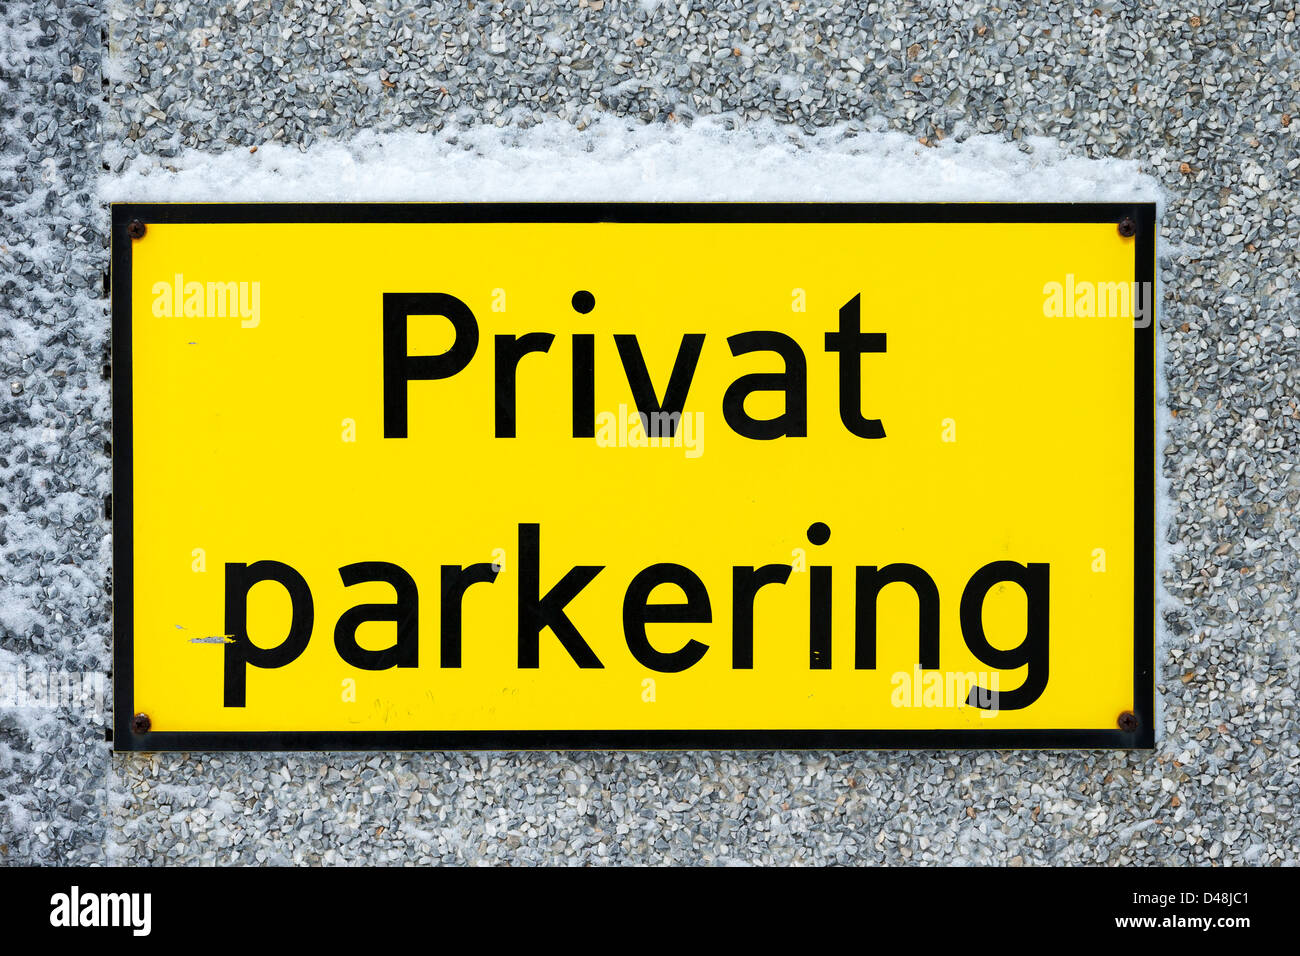 Sign in Norwegian saying 'Privat parkering' - private parking. Stock Photo